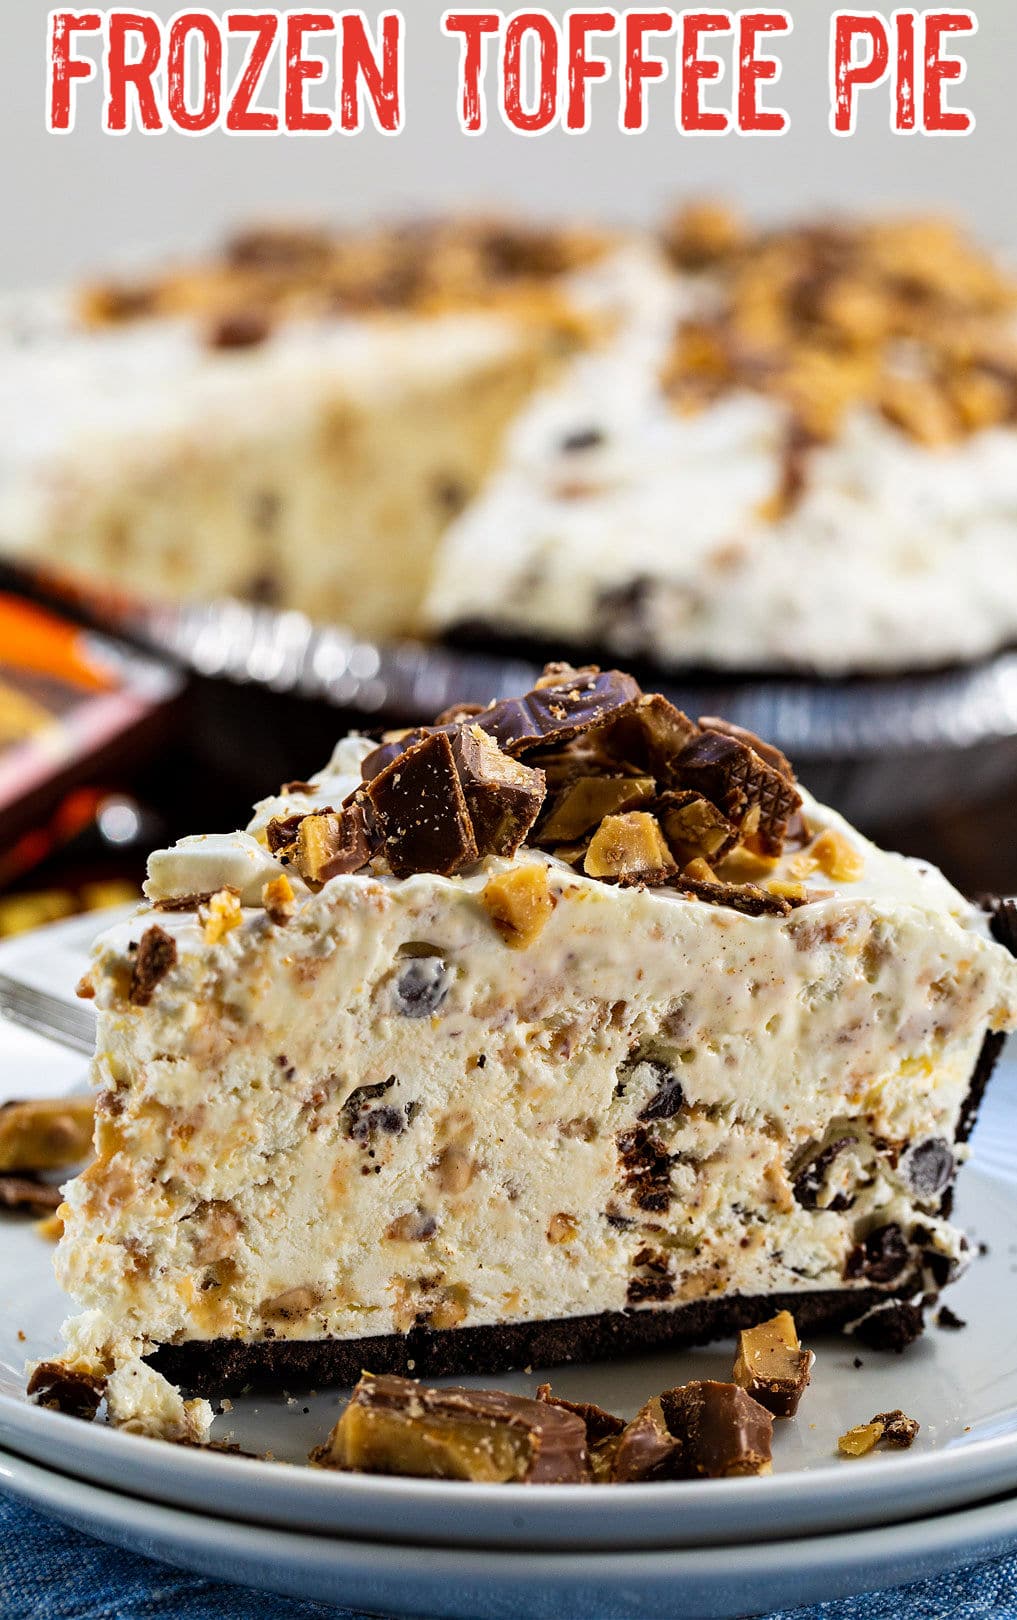 Slice of Frozen Toffee Pie topped with chopped heath bars.